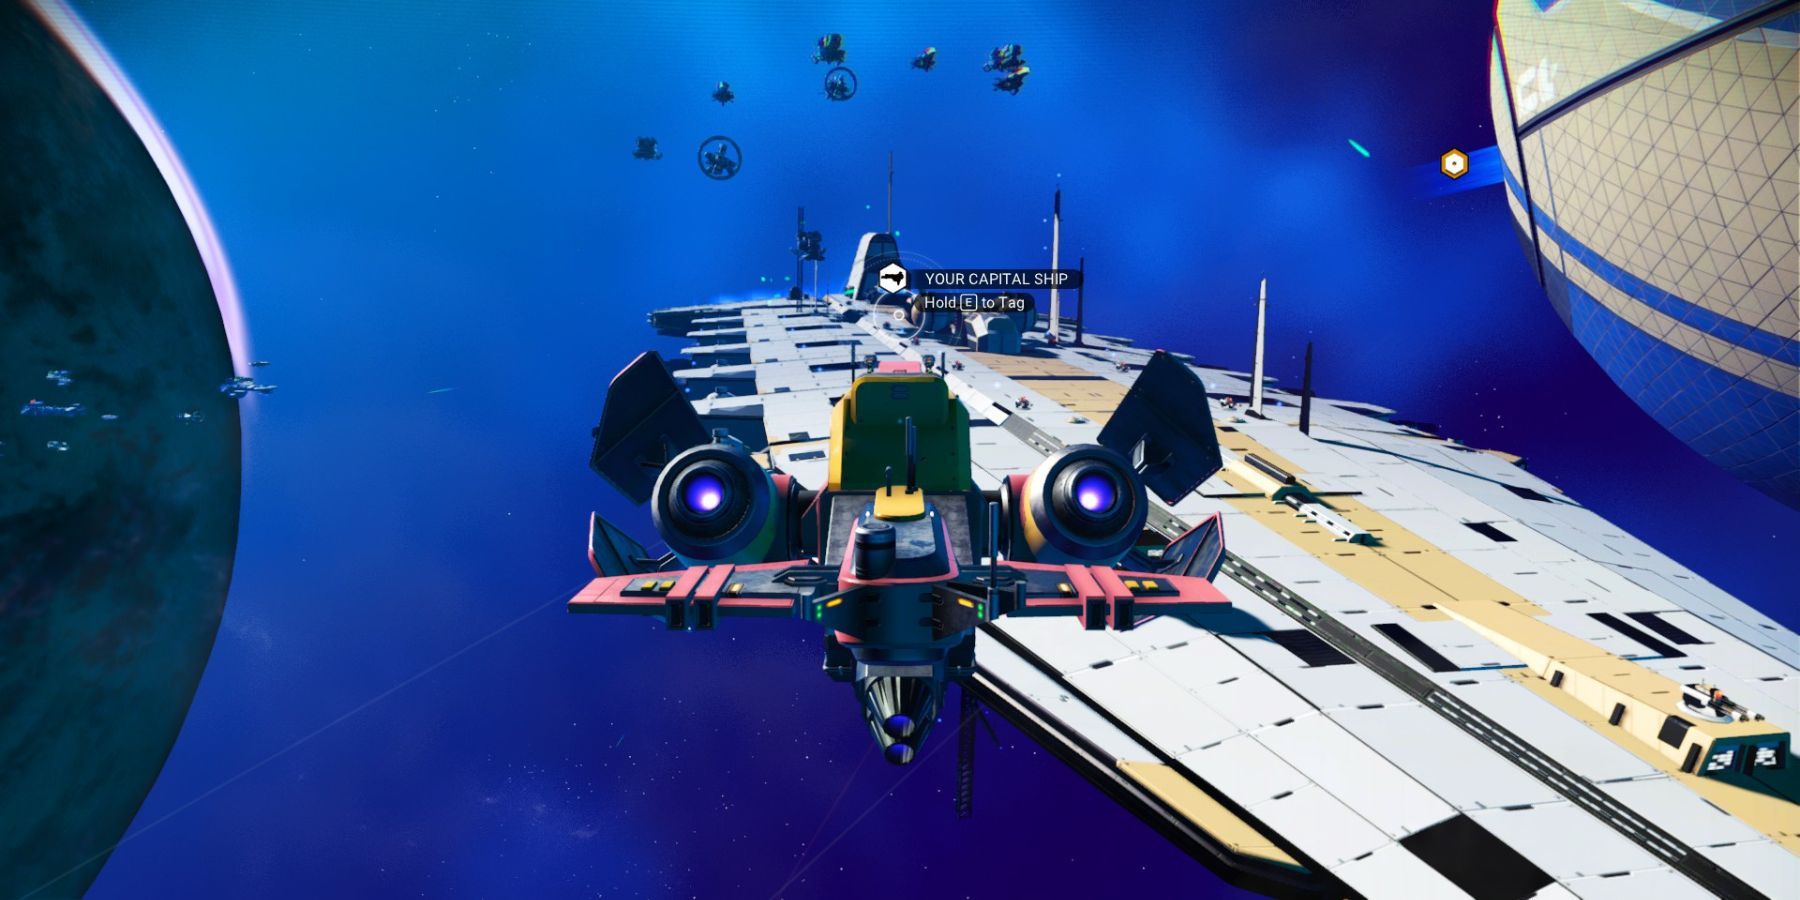 Flying past a freighter